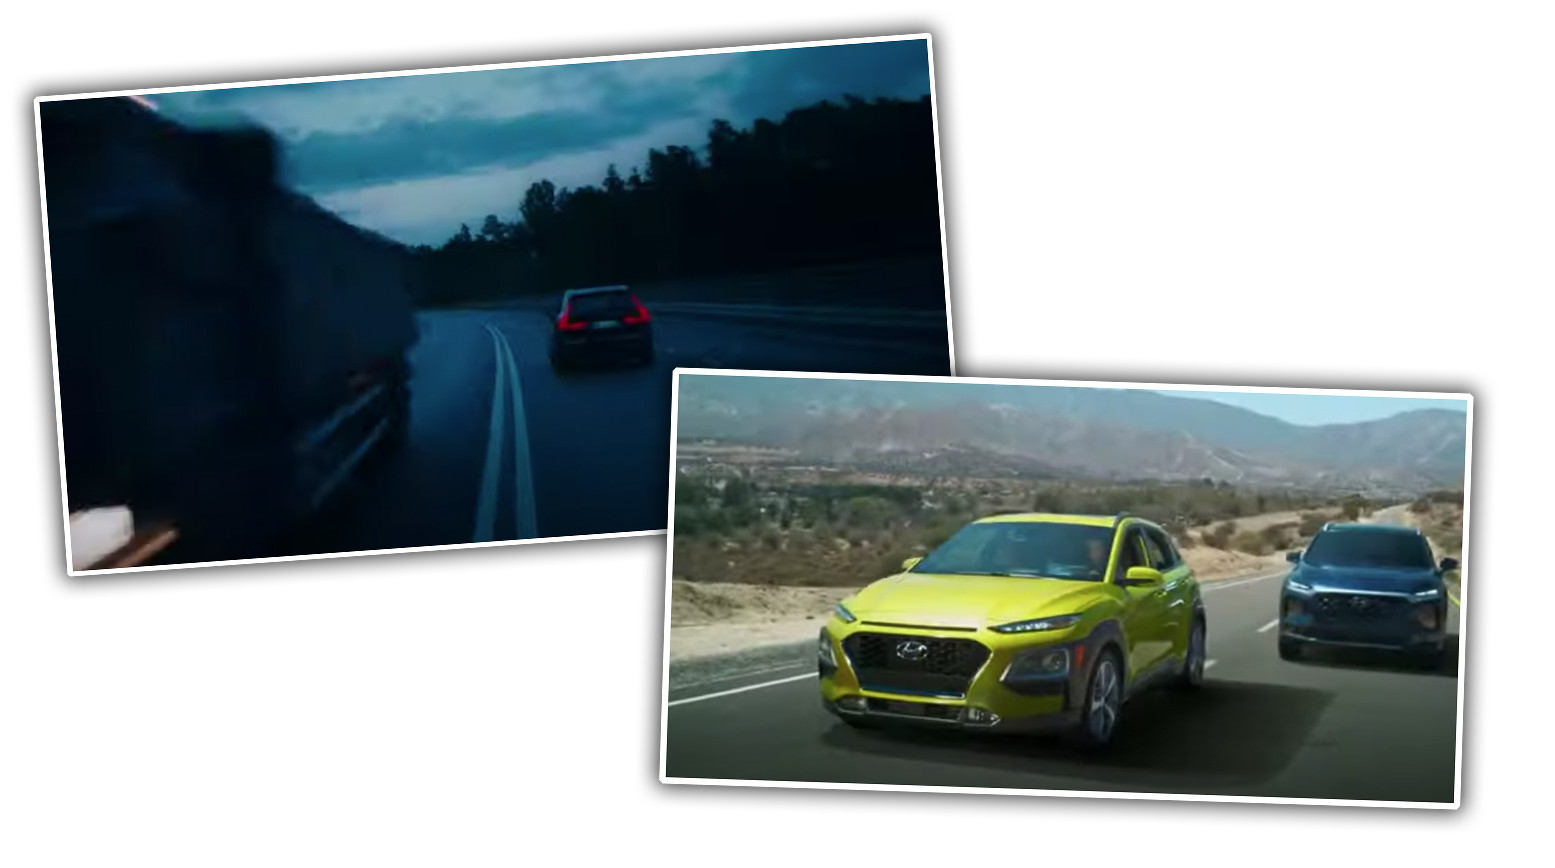 Car Commercials Are Starting To Promote Driver Assist Features In Really Stupid And Dangerous Ways